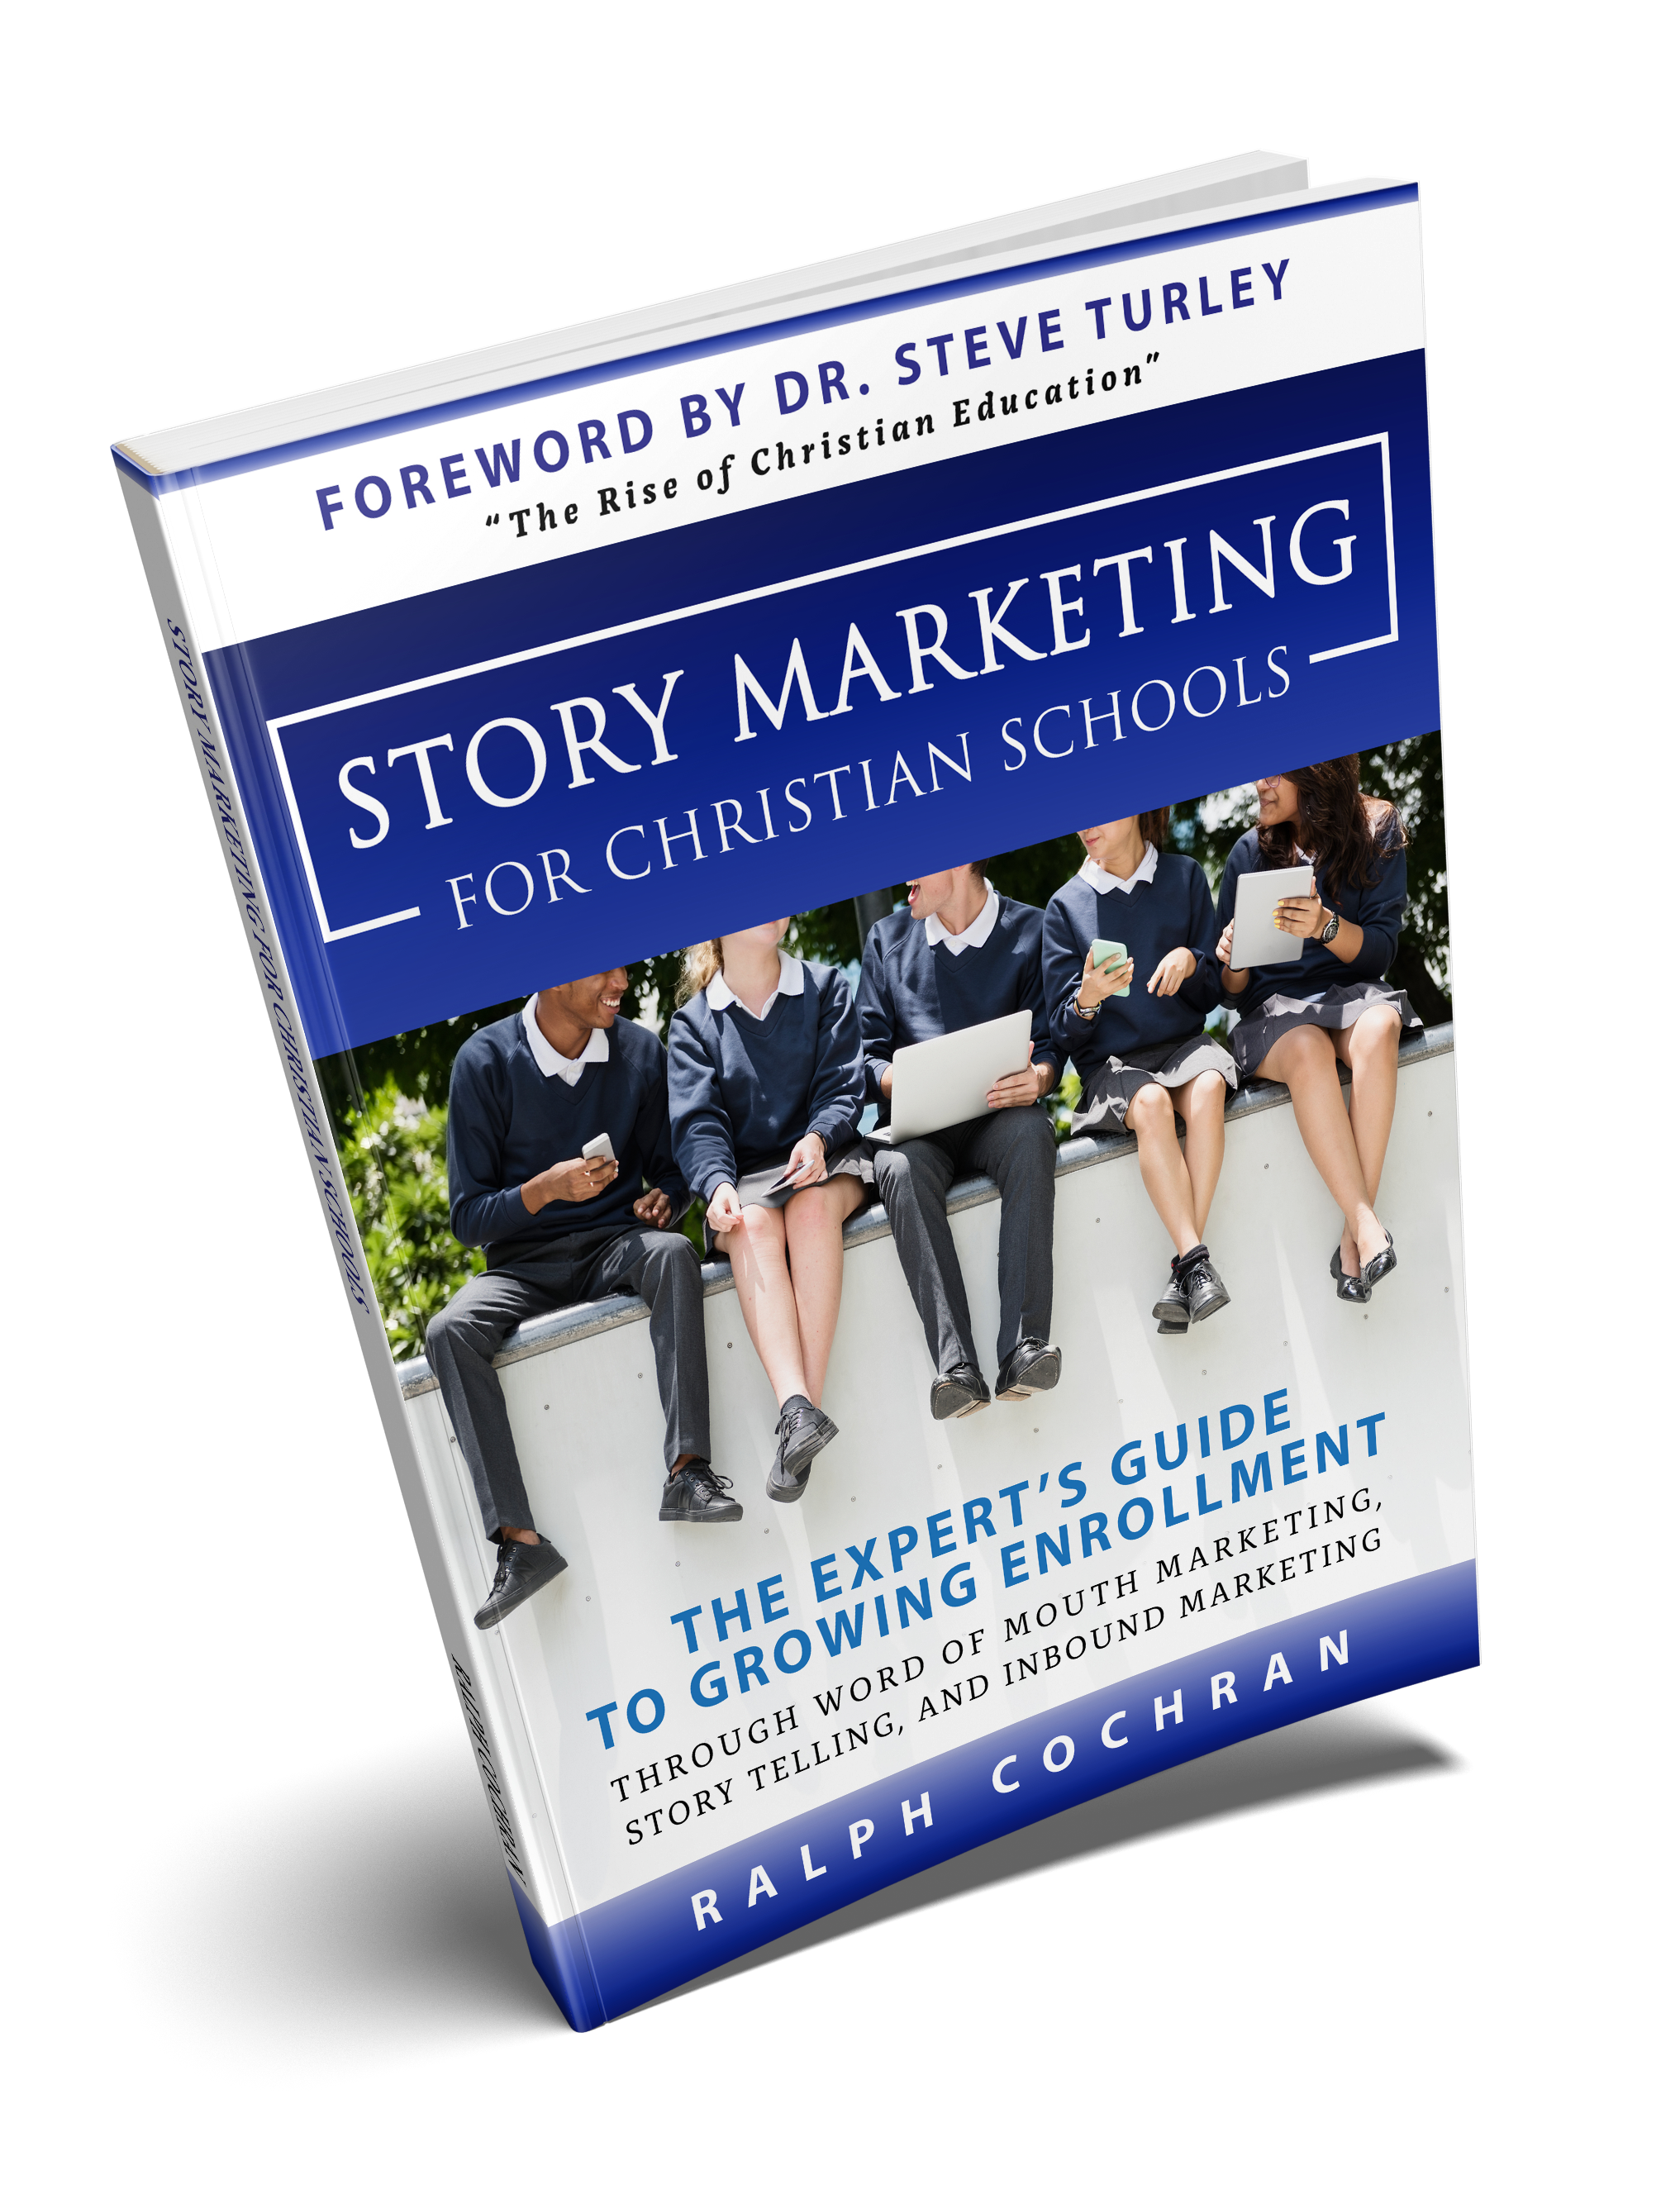 Story Marketing For Christian Schools